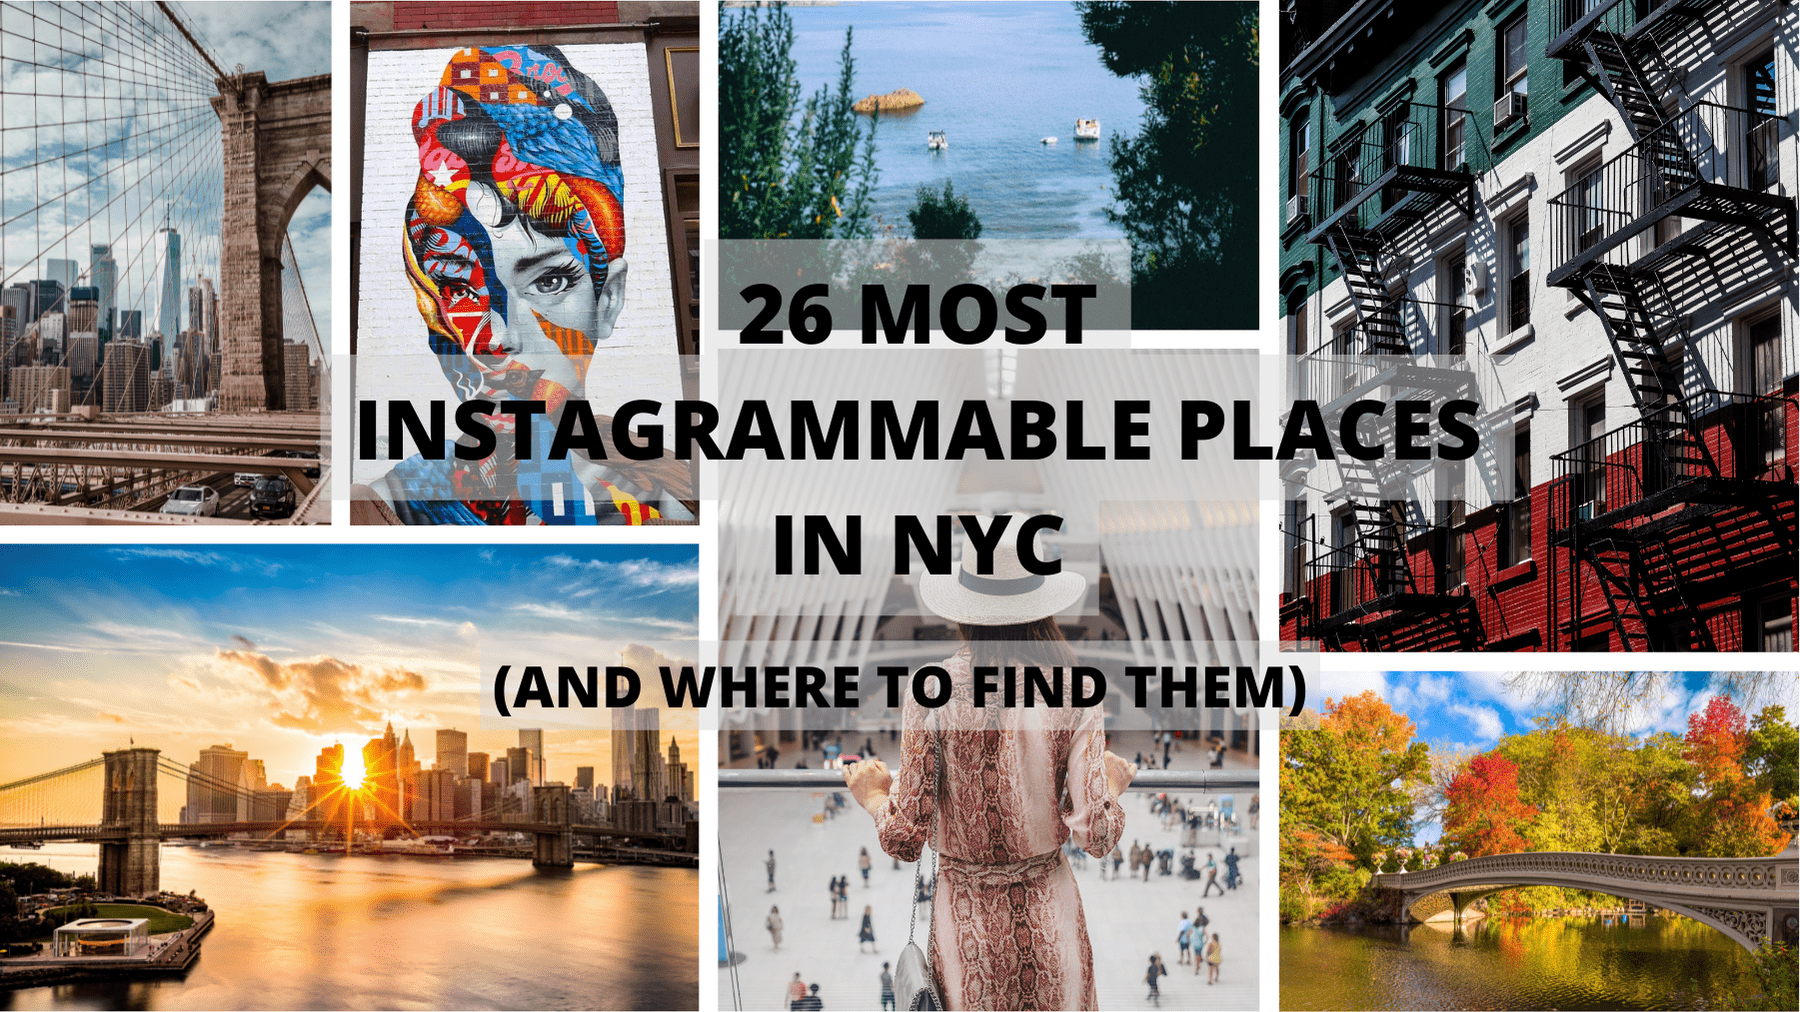 26 Most Instagrammable Places in NYC (and where to find them)